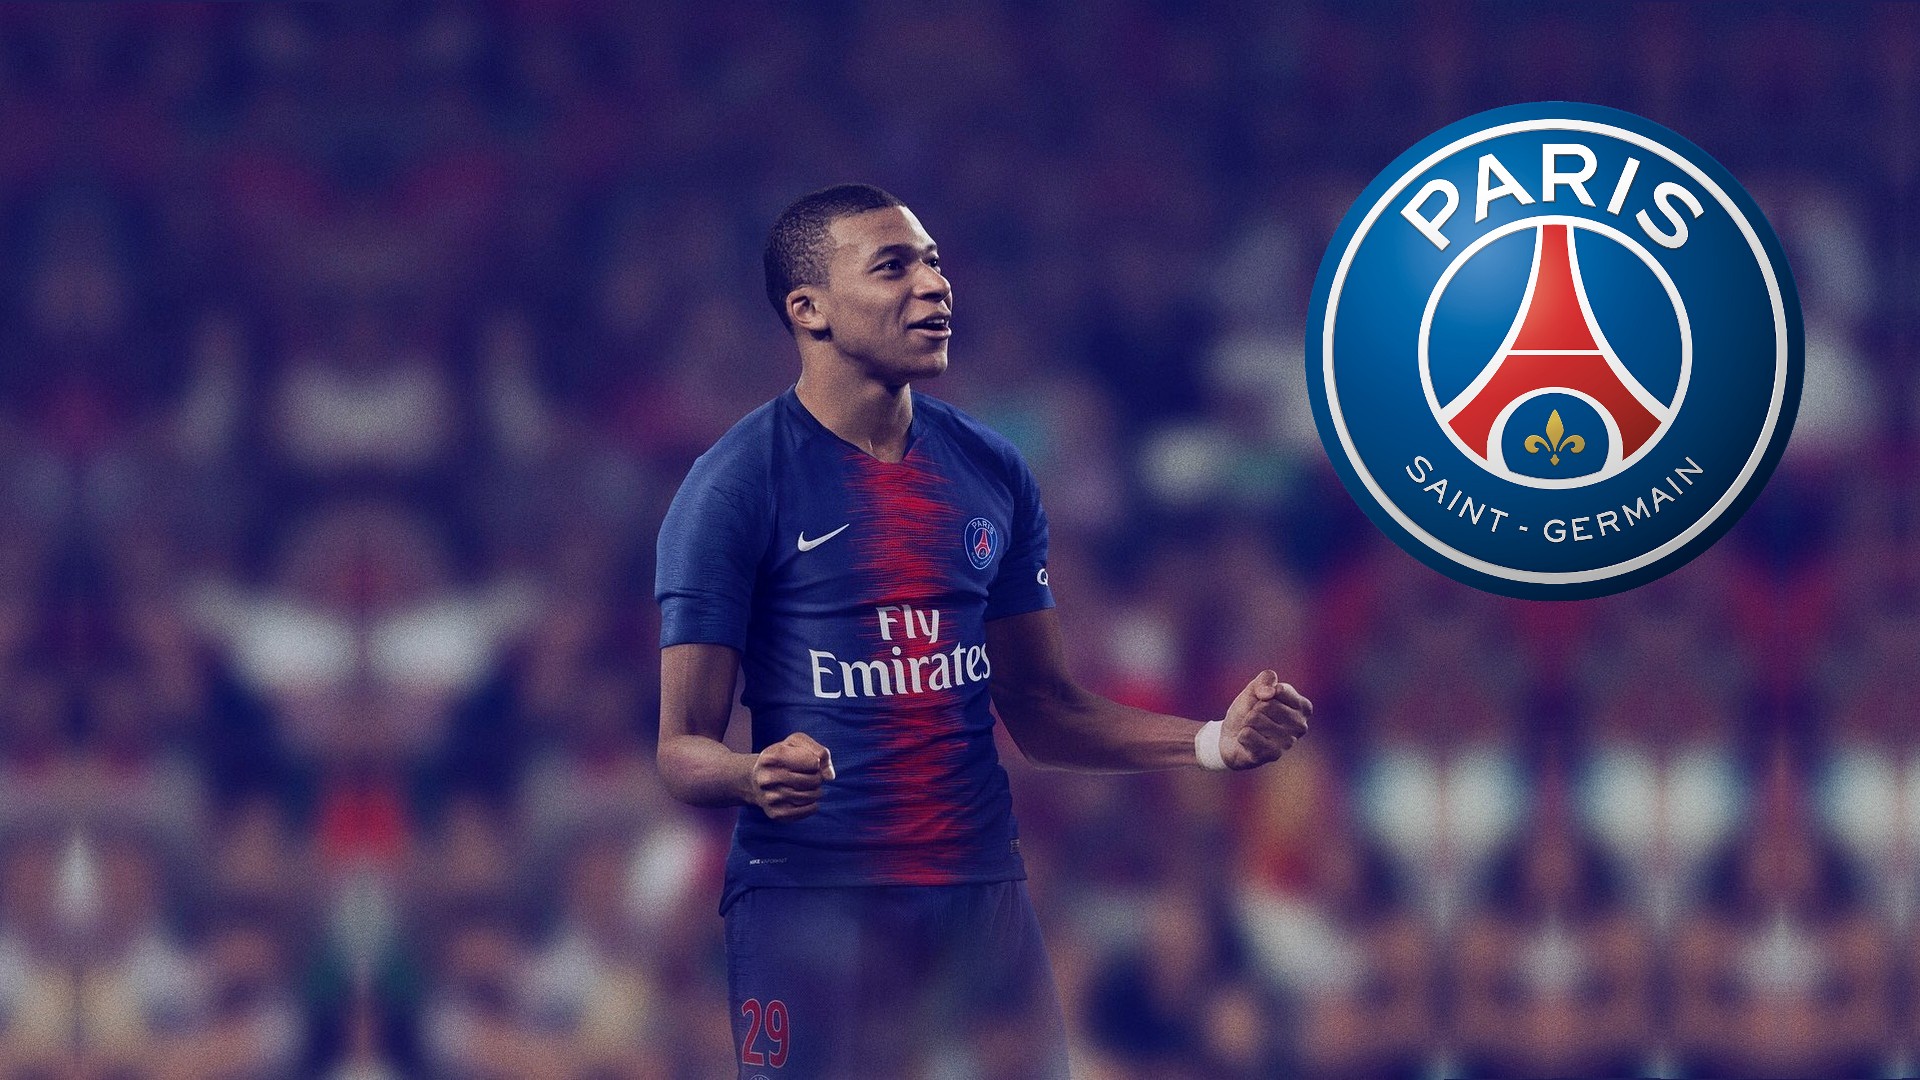 Mbappe Paris Saint-Germain Wallpaper HD with resolution 1920x1080 pixel. You can make this wallpaper for your Mac or Windows Desktop Background, iPhone, Android or Tablet and another Smartphone device